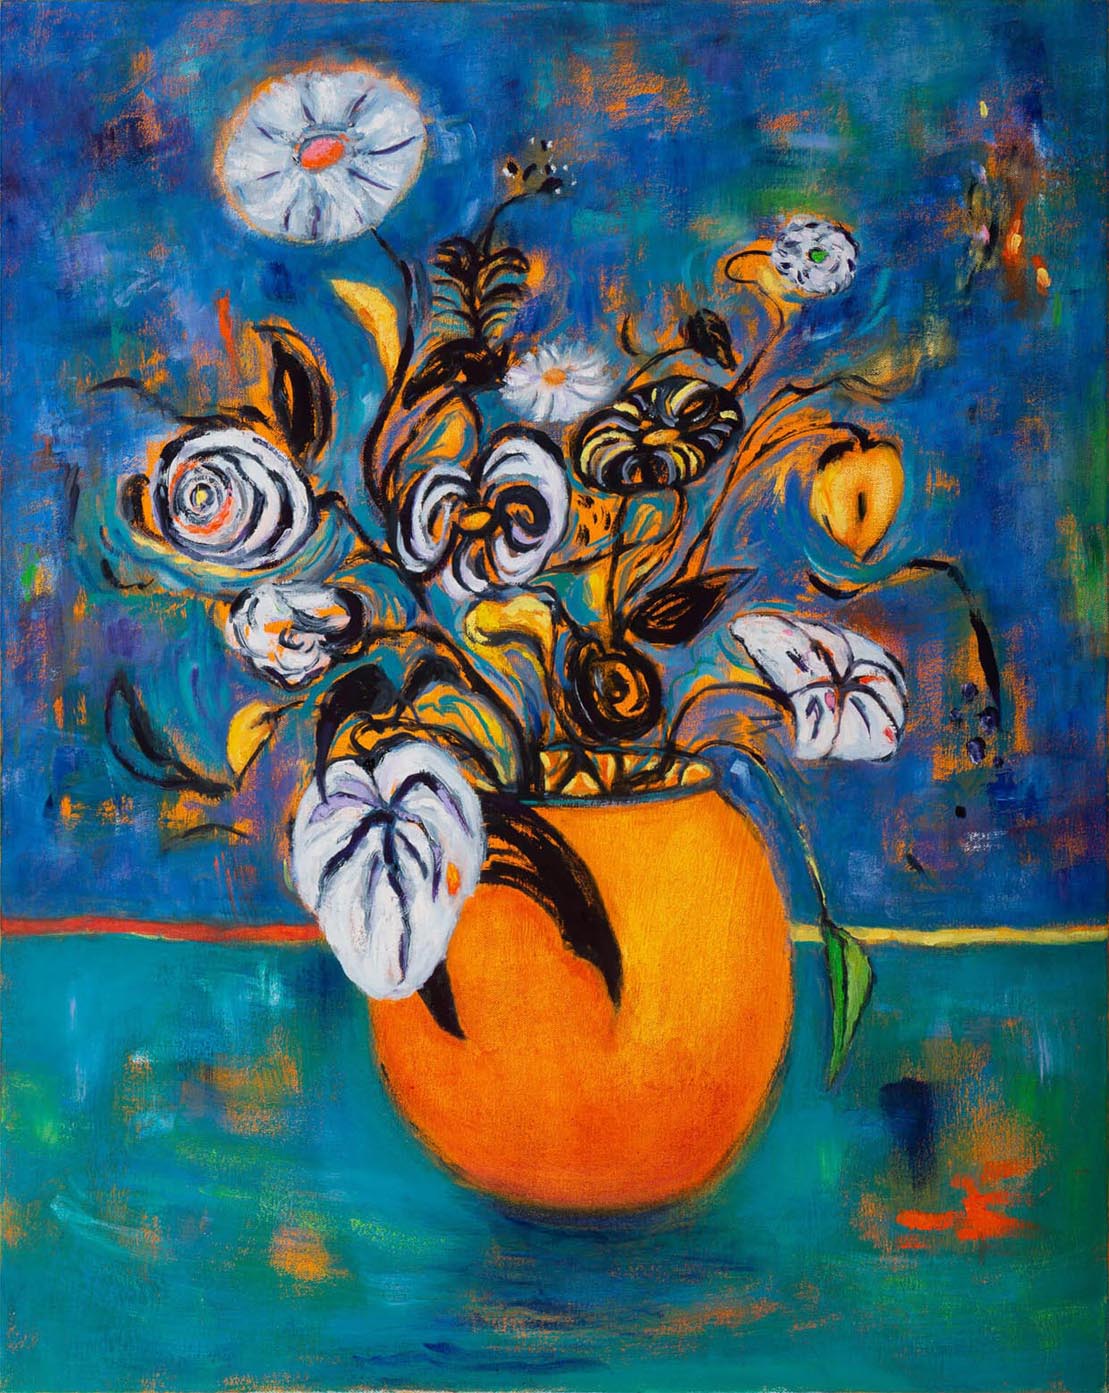 Contemporary Floral Abstract Art with blue & black anchored by an orange vase.